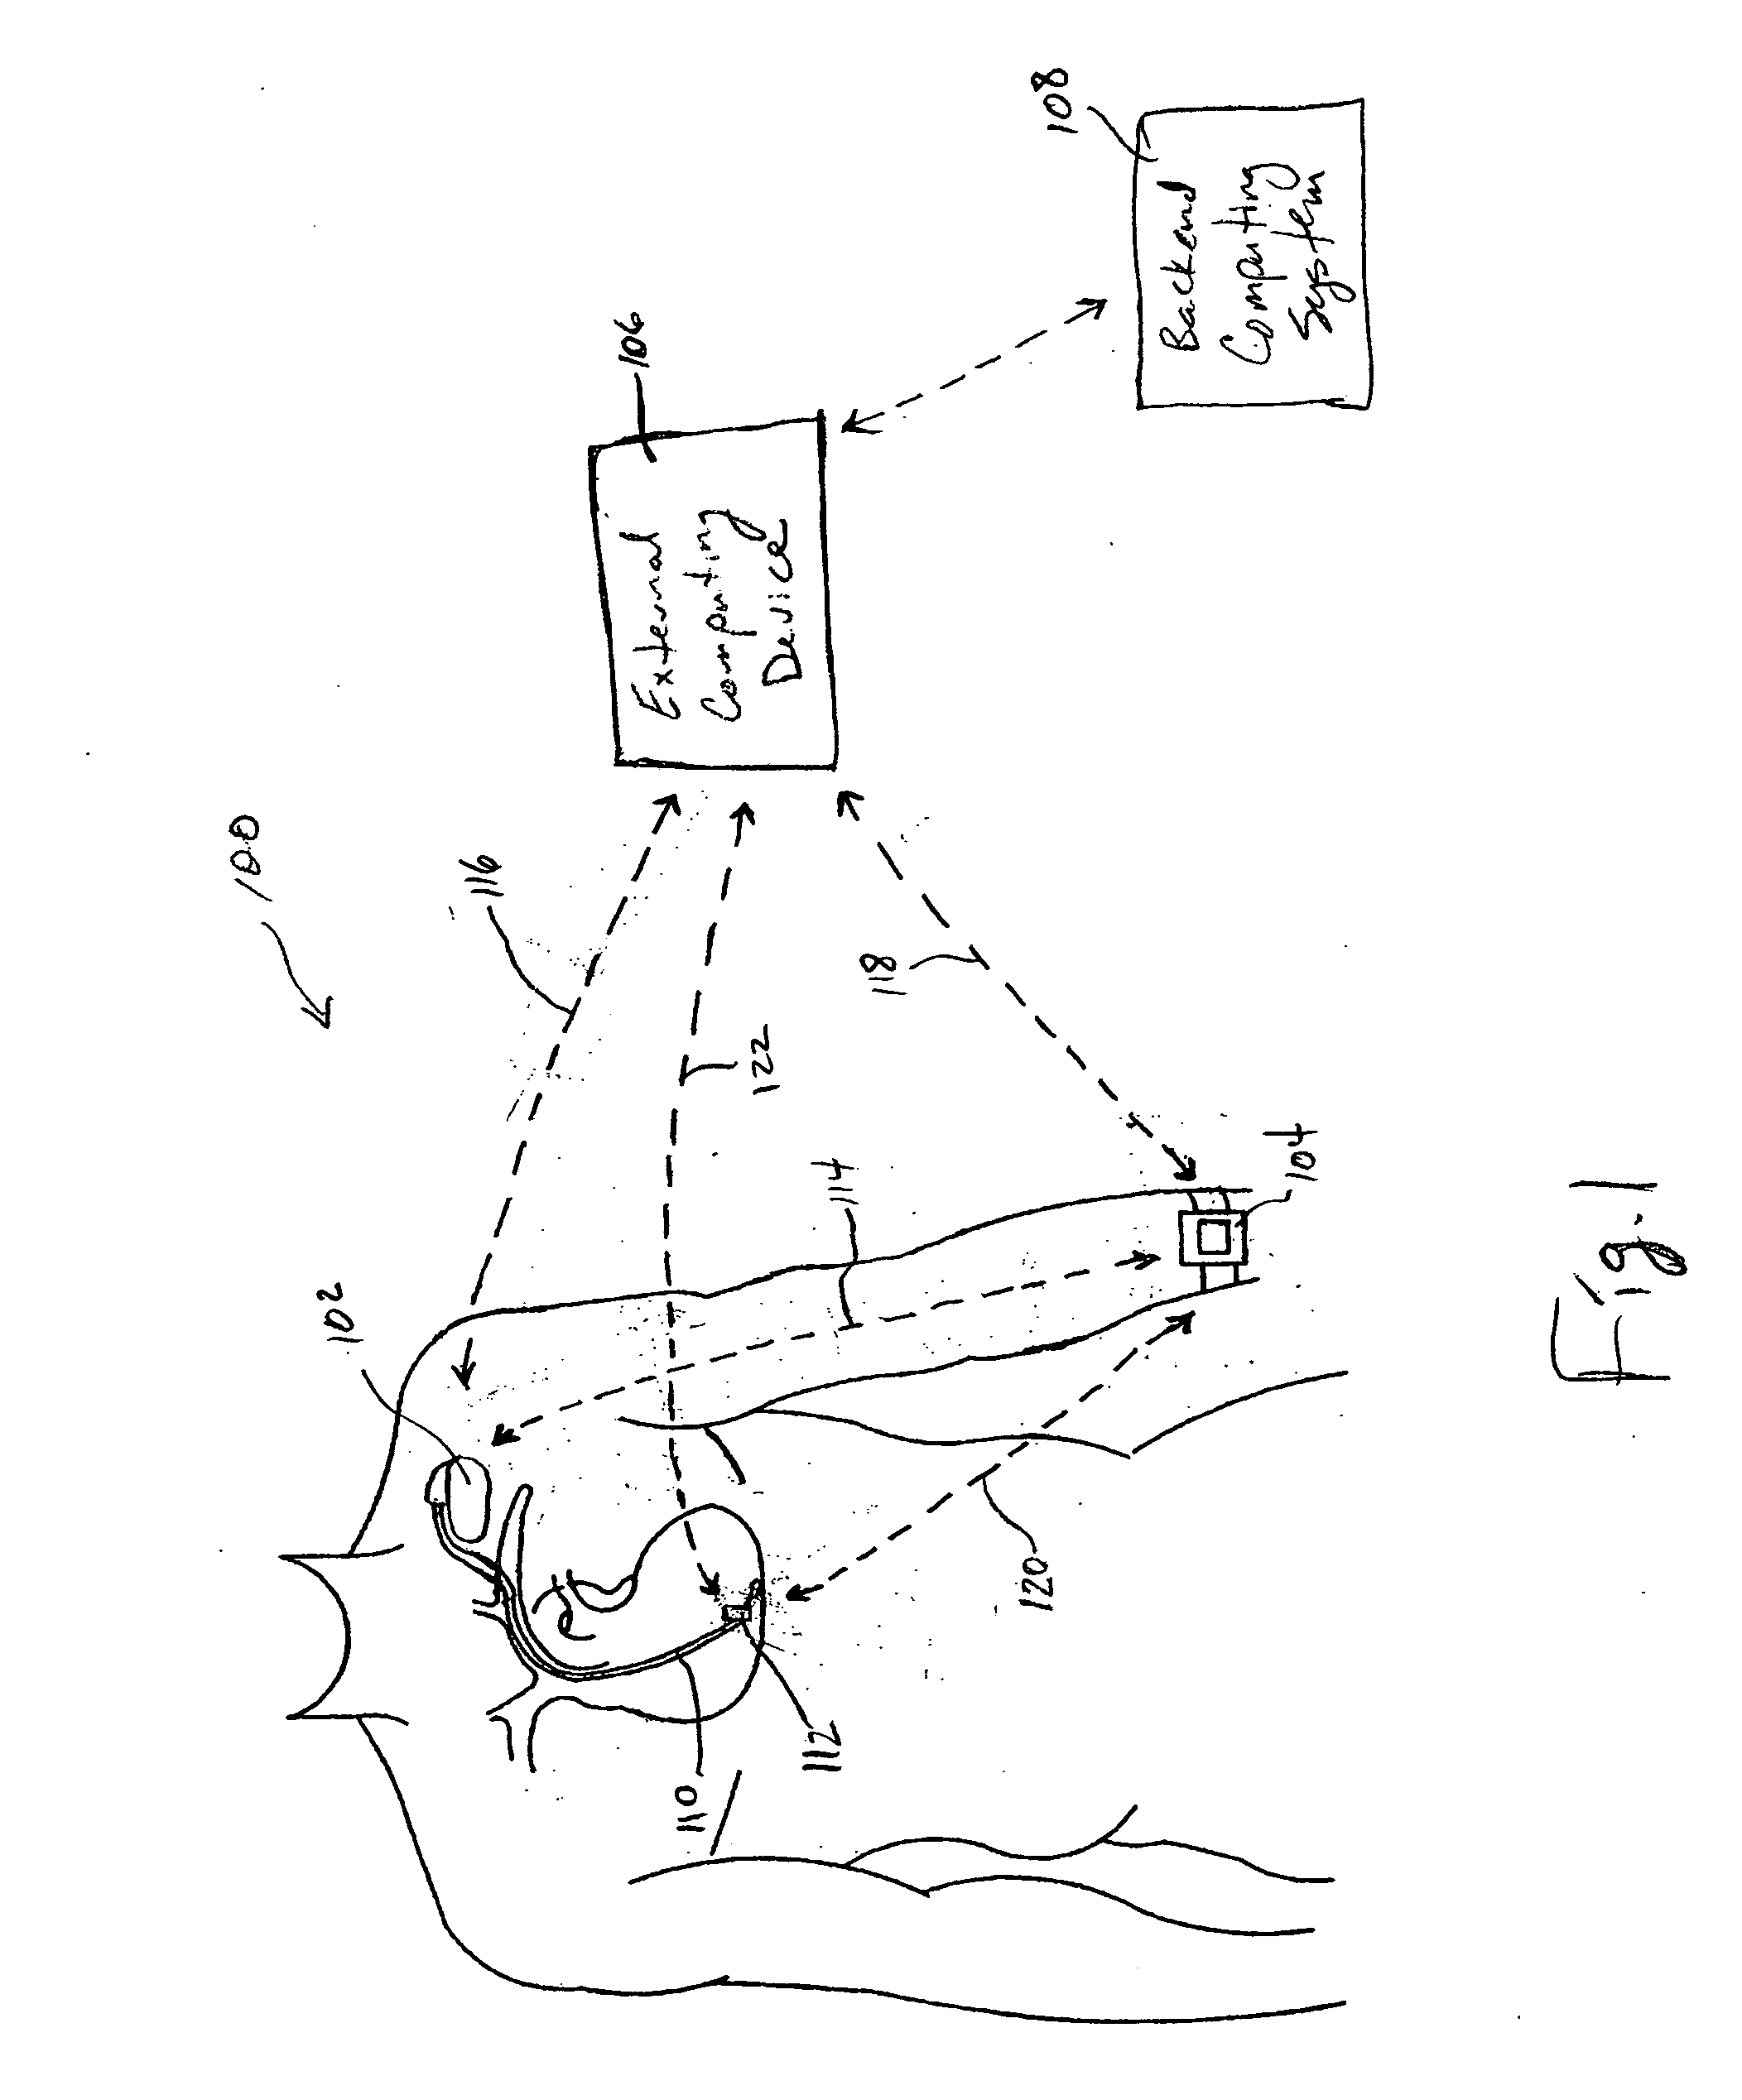 Systems and methods for deriving relative physiologic measurements using a backend computing system